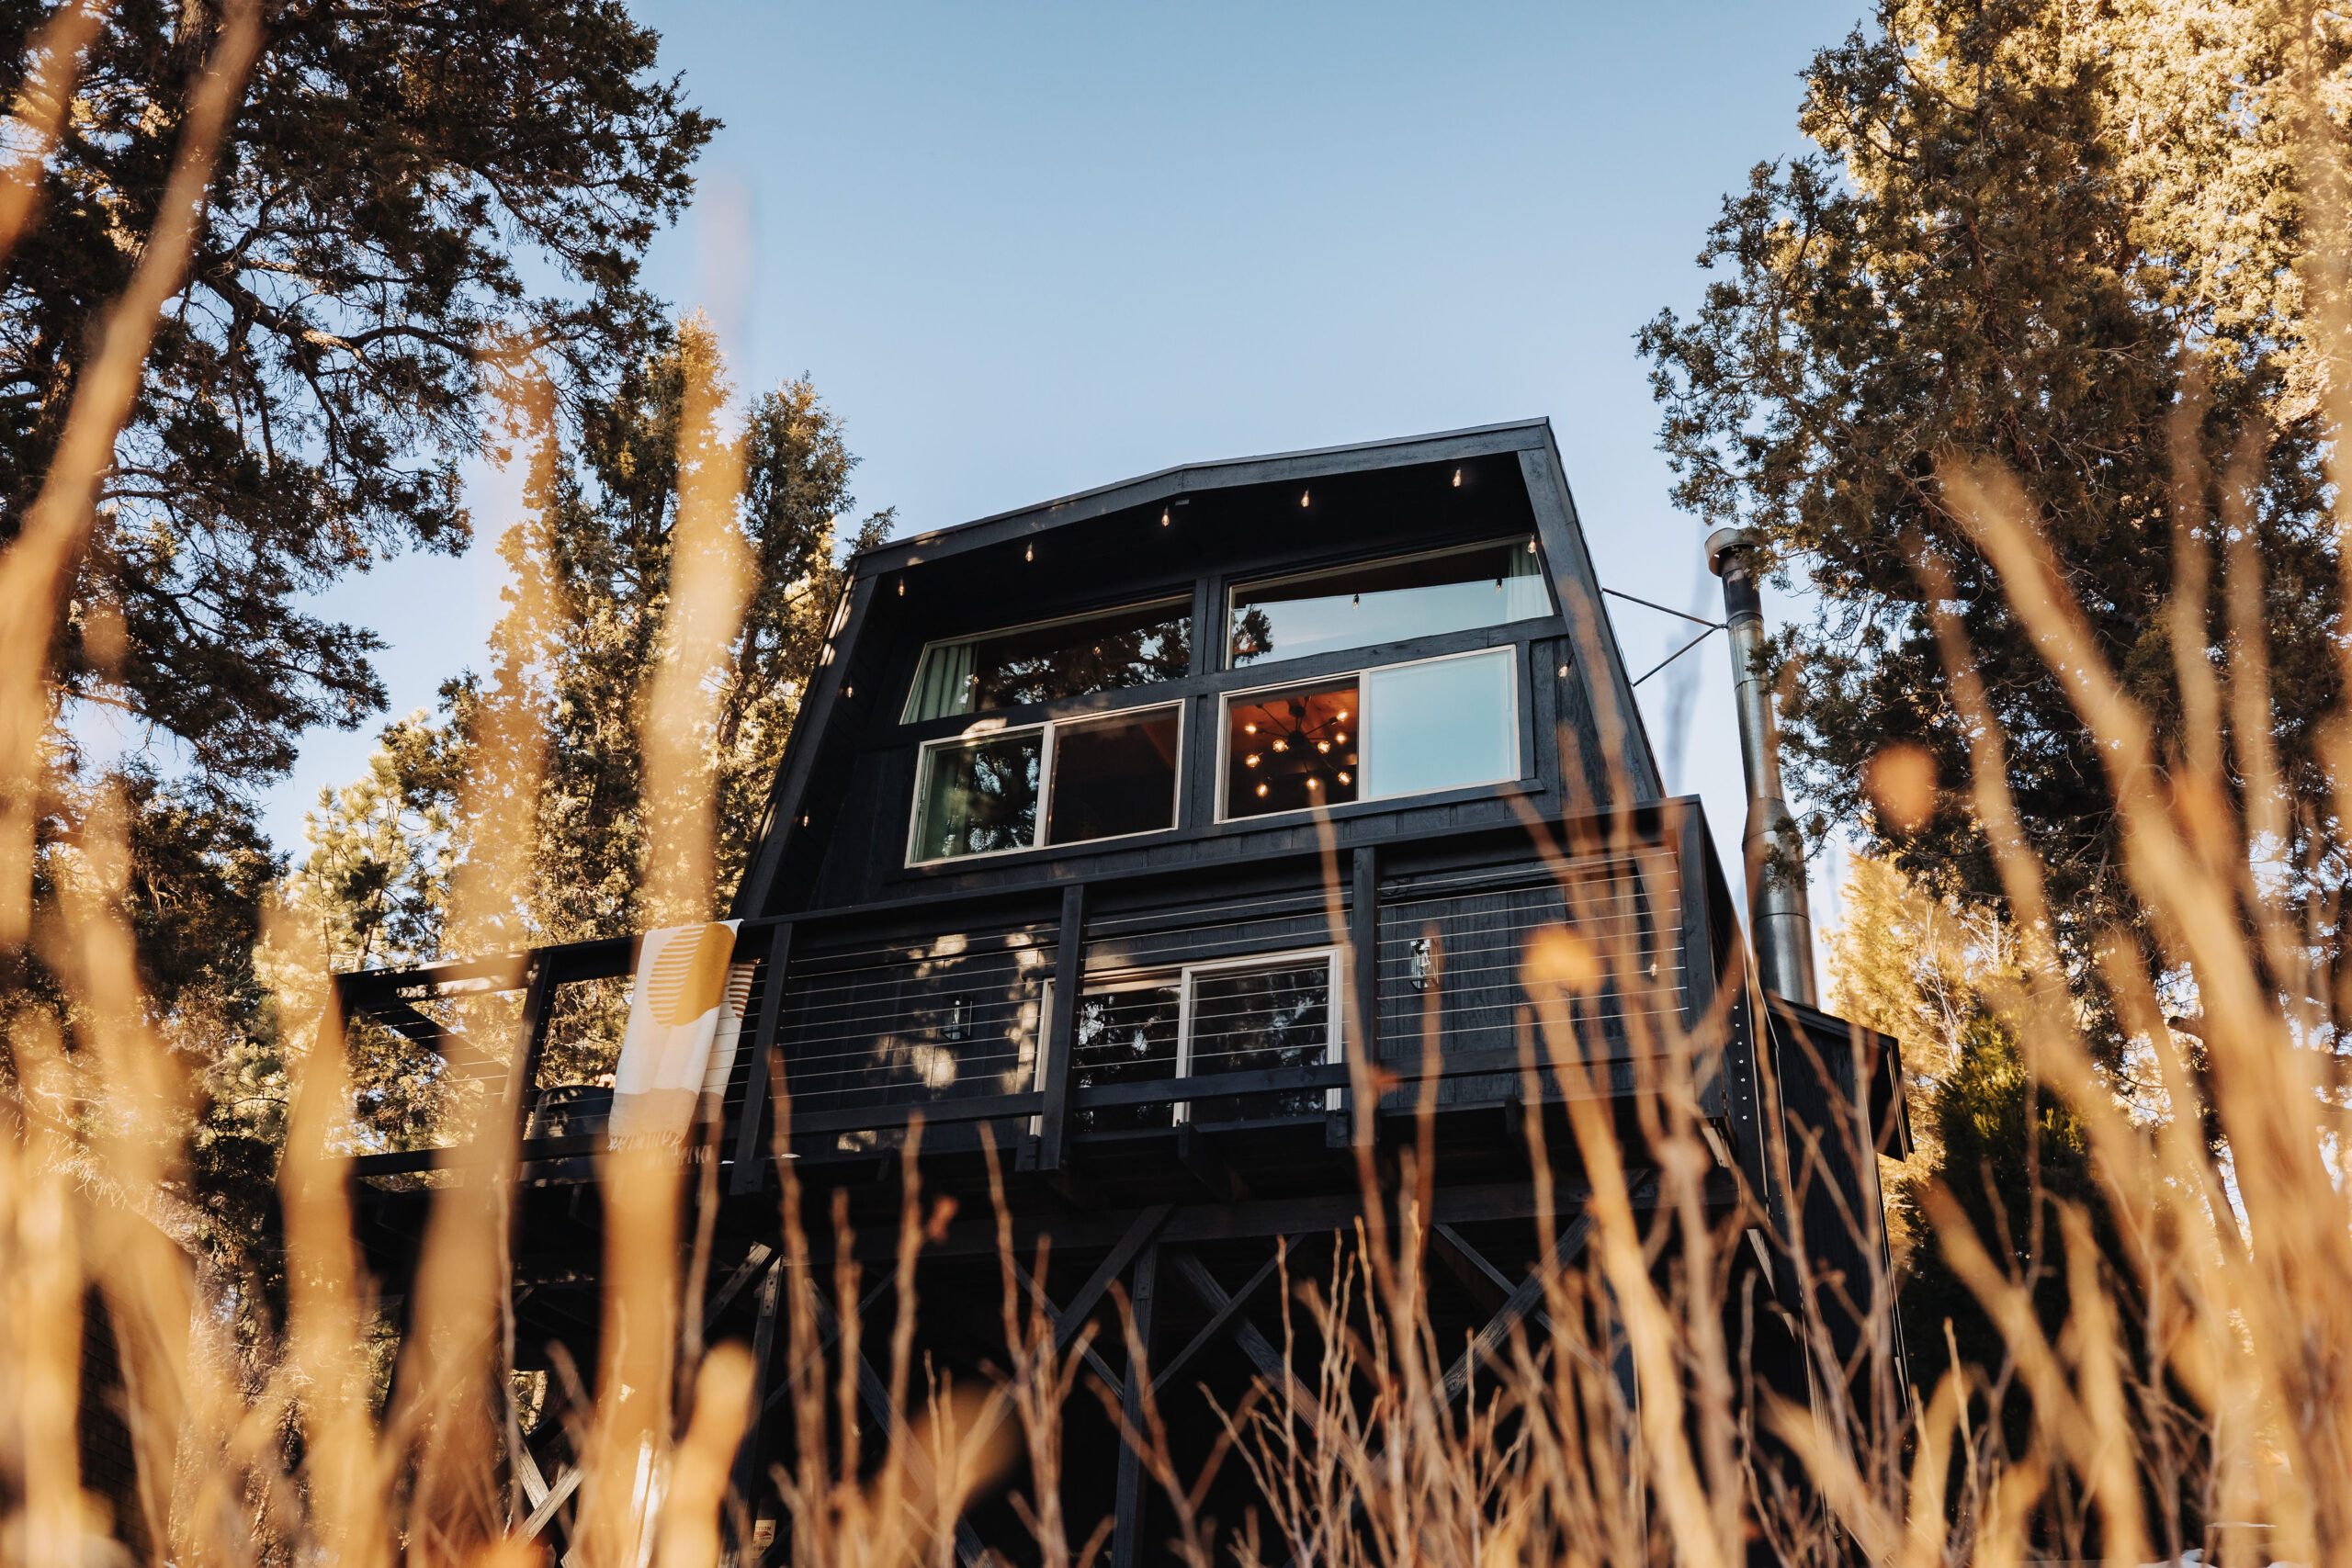 Exterior view of a black cabin and deck at Moondance Cabin vacation rental in Big Bear, California. Photo by Gianna Christina.